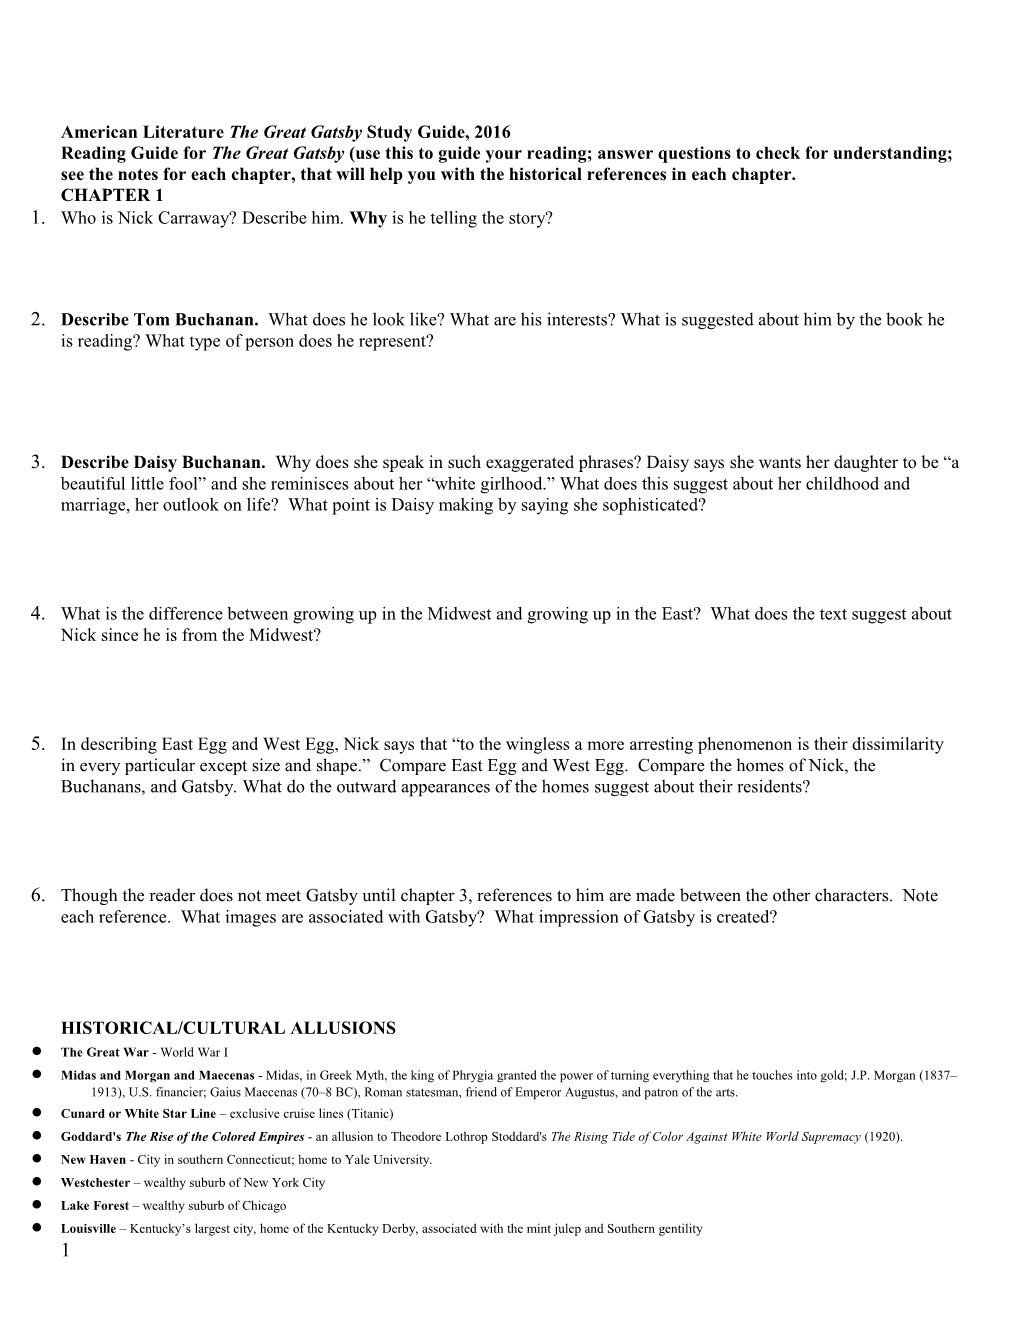 American Literature the Great Gatsby Study Guide, 2016